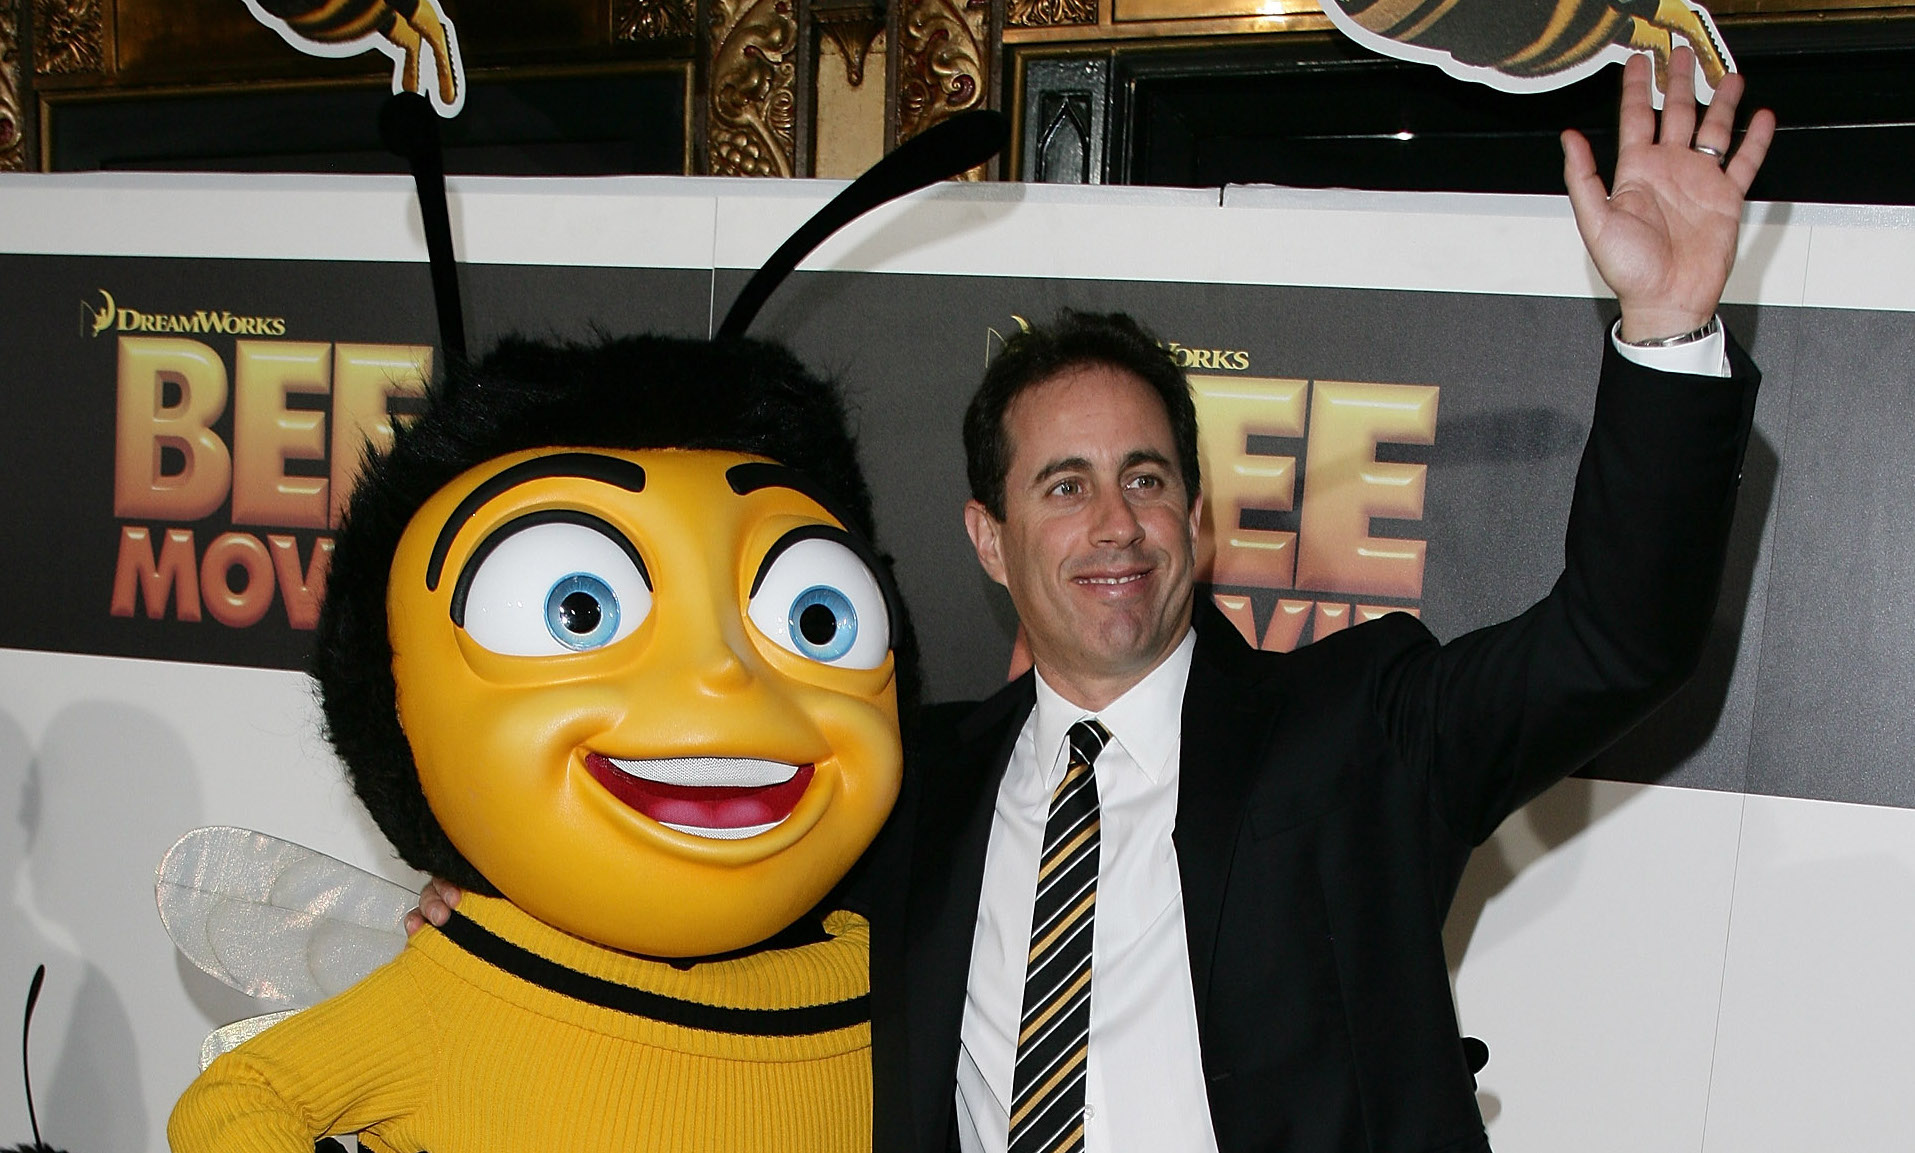 Jerry Seinfeld apologizes for risqué content in ‘Bee Movie